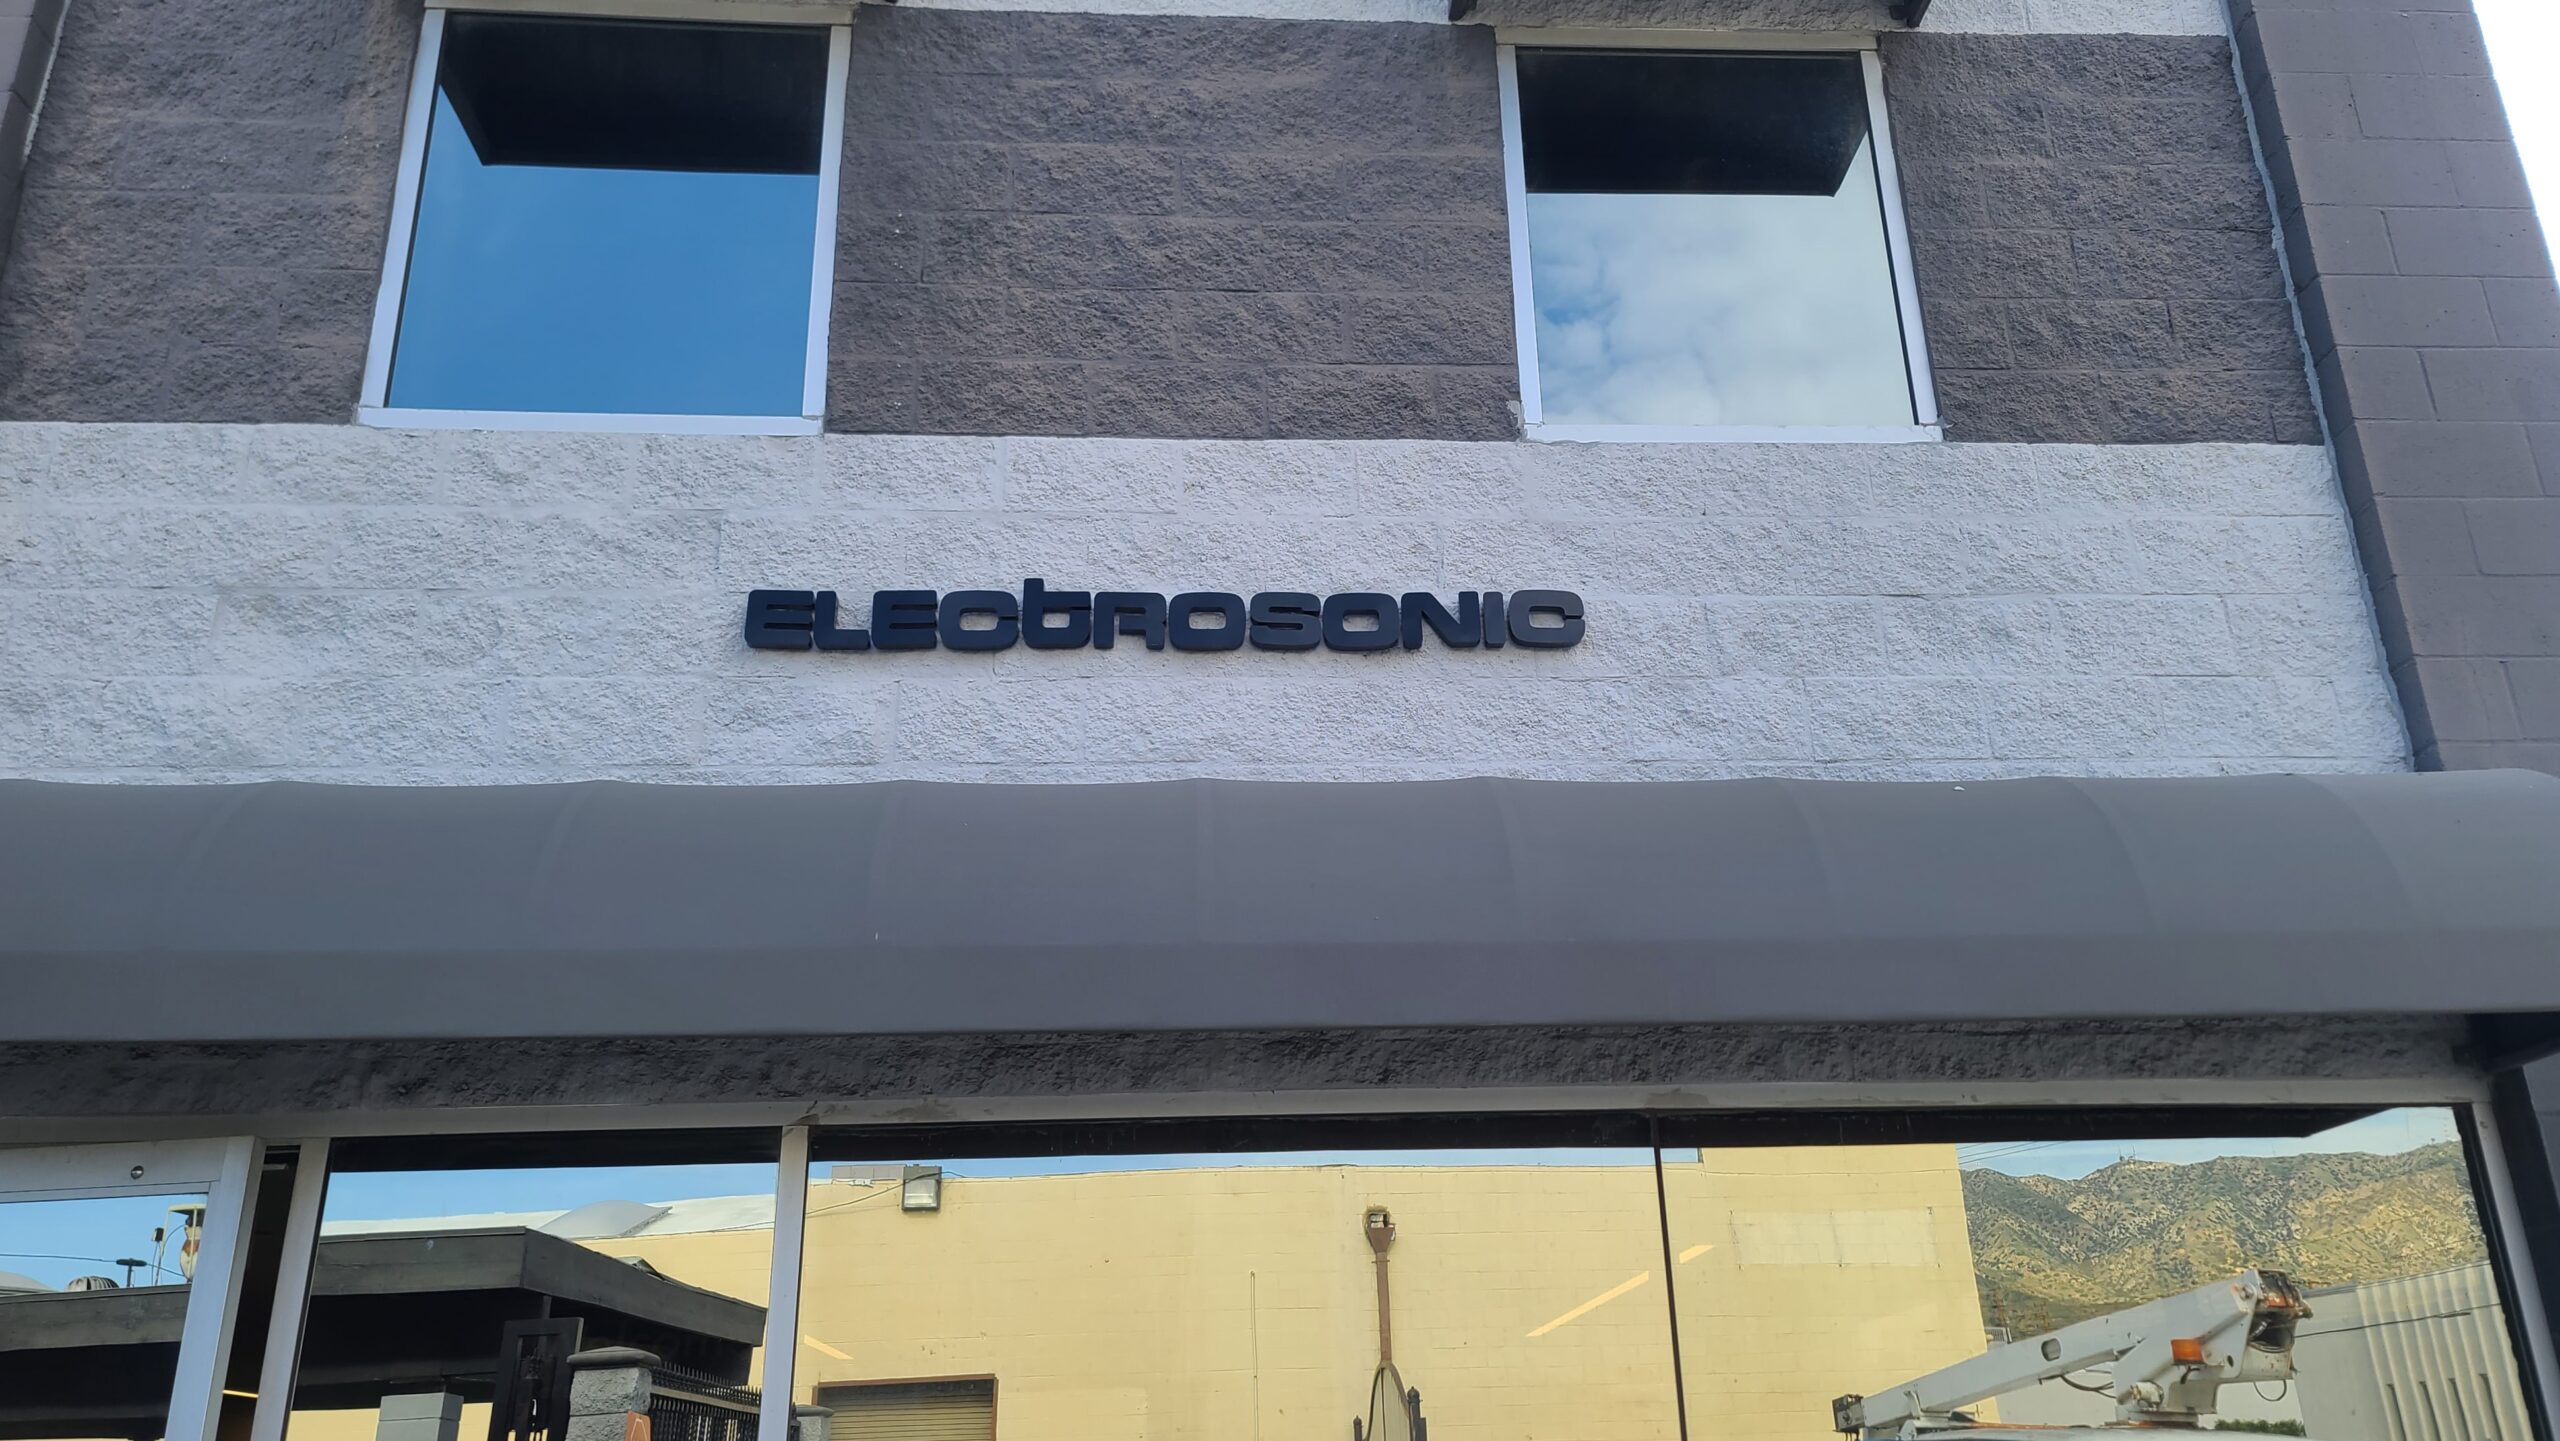 You are currently viewing Black Stainless Steel Building Signs for Electrosonic in Burbank